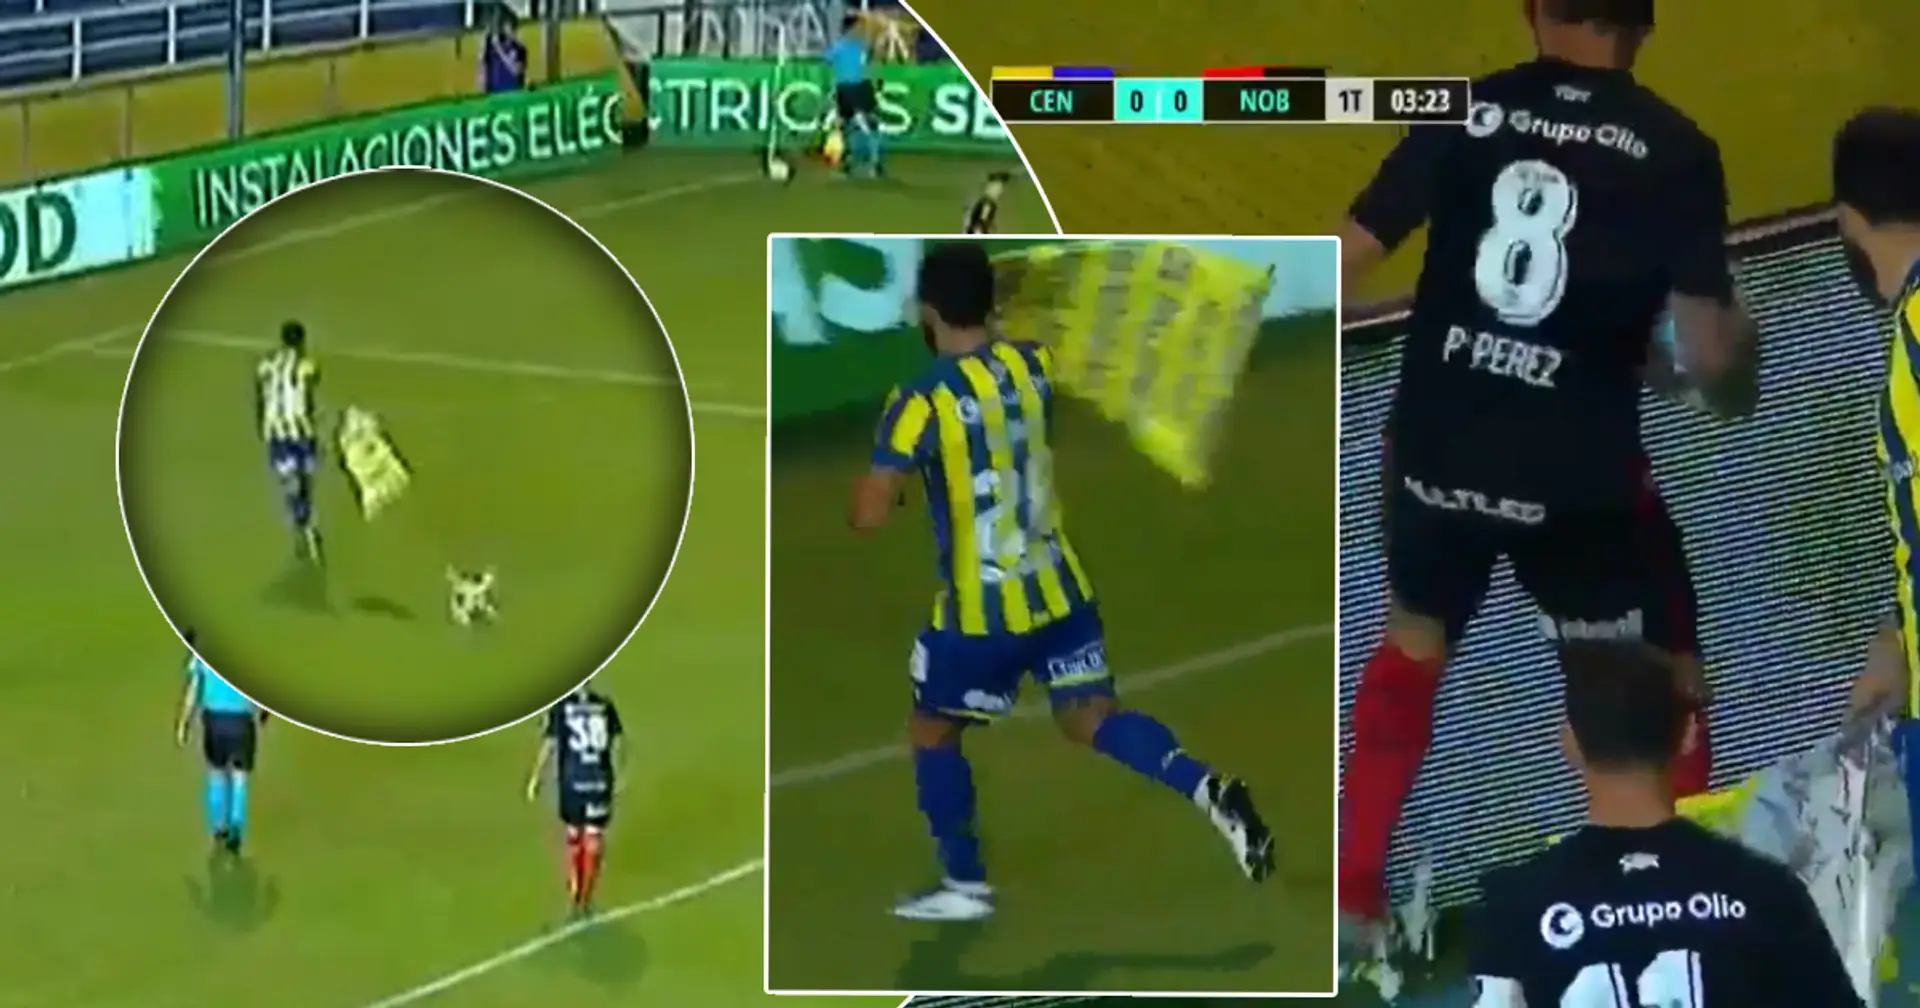 Newell's player squishes drone that carries mocking message, rival player helps him